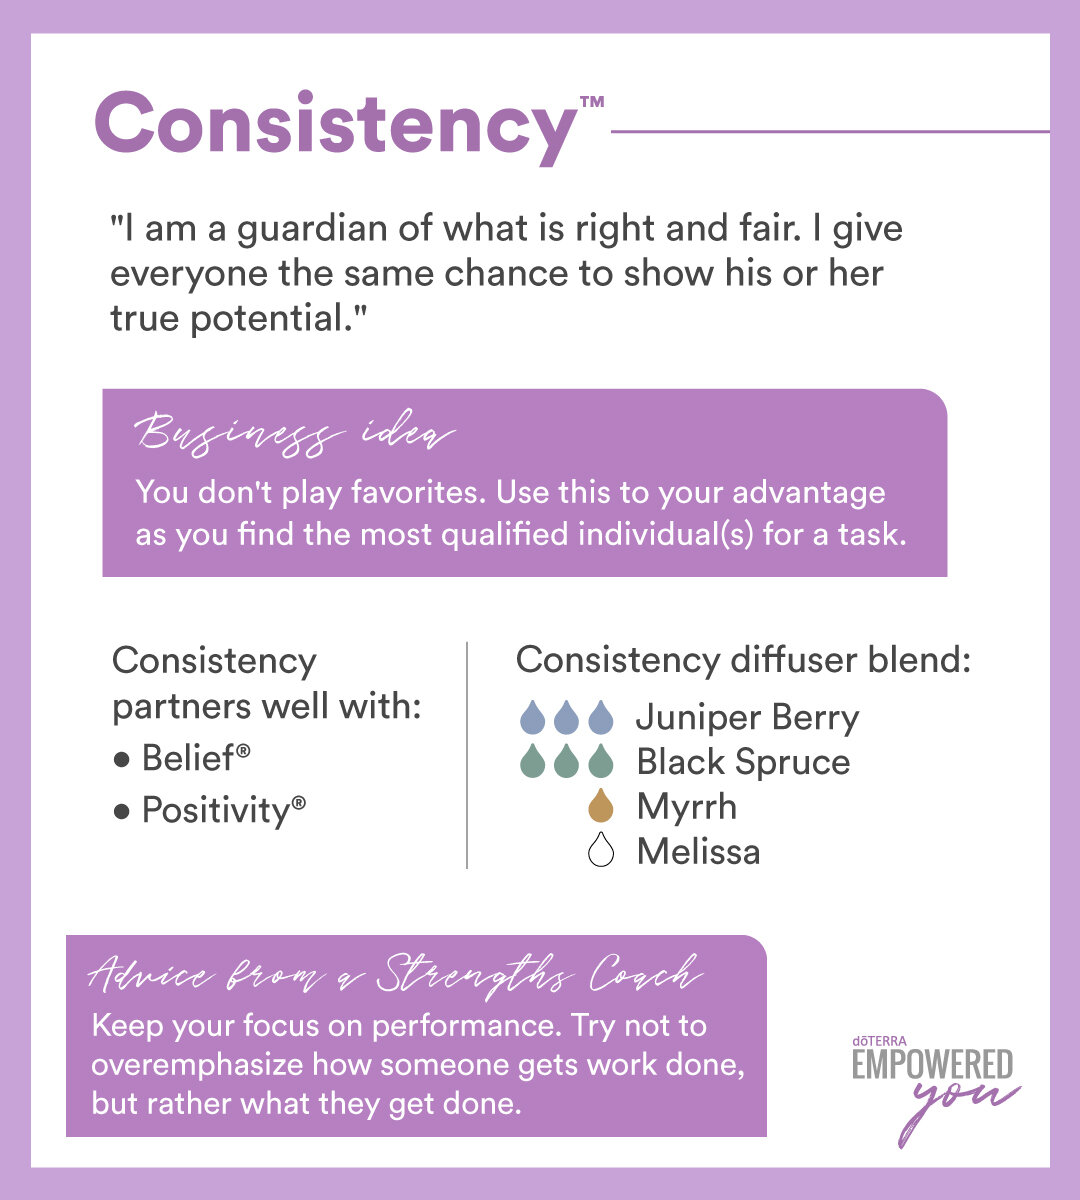 Strengths and oils-insight-Consistency.jpg